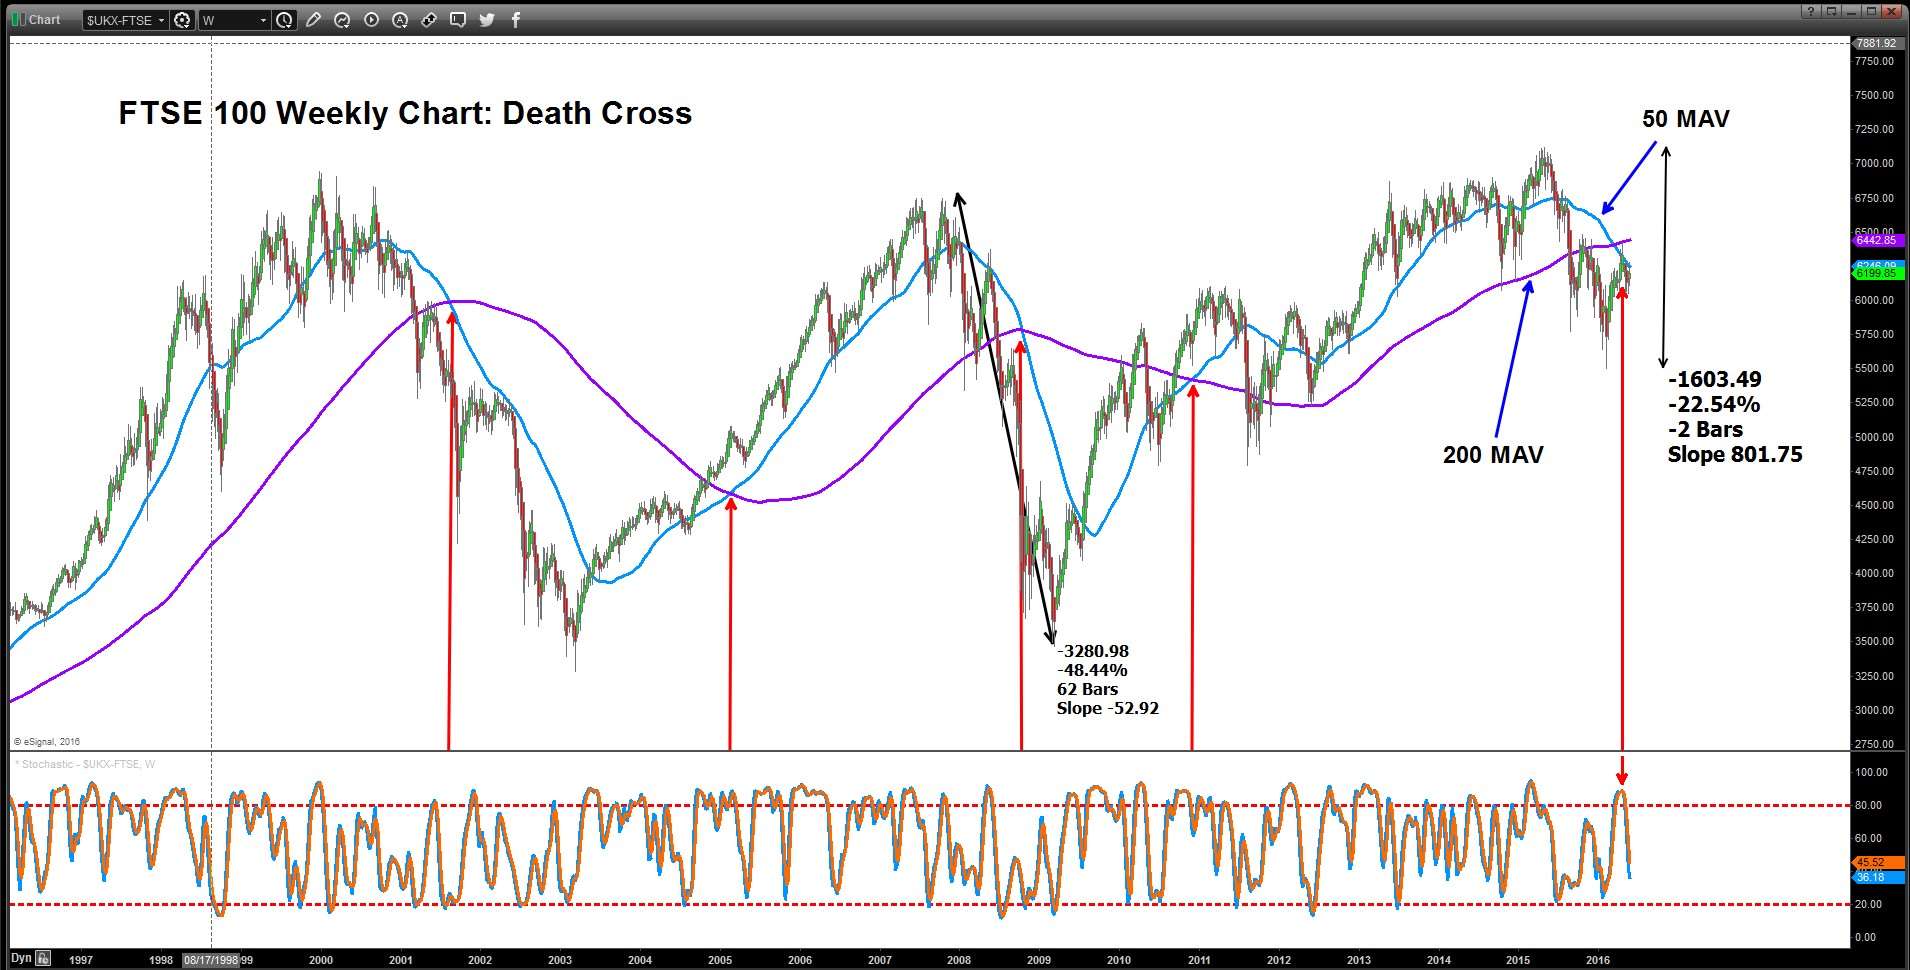 The FTSE 100 is in a 'death cross' situation